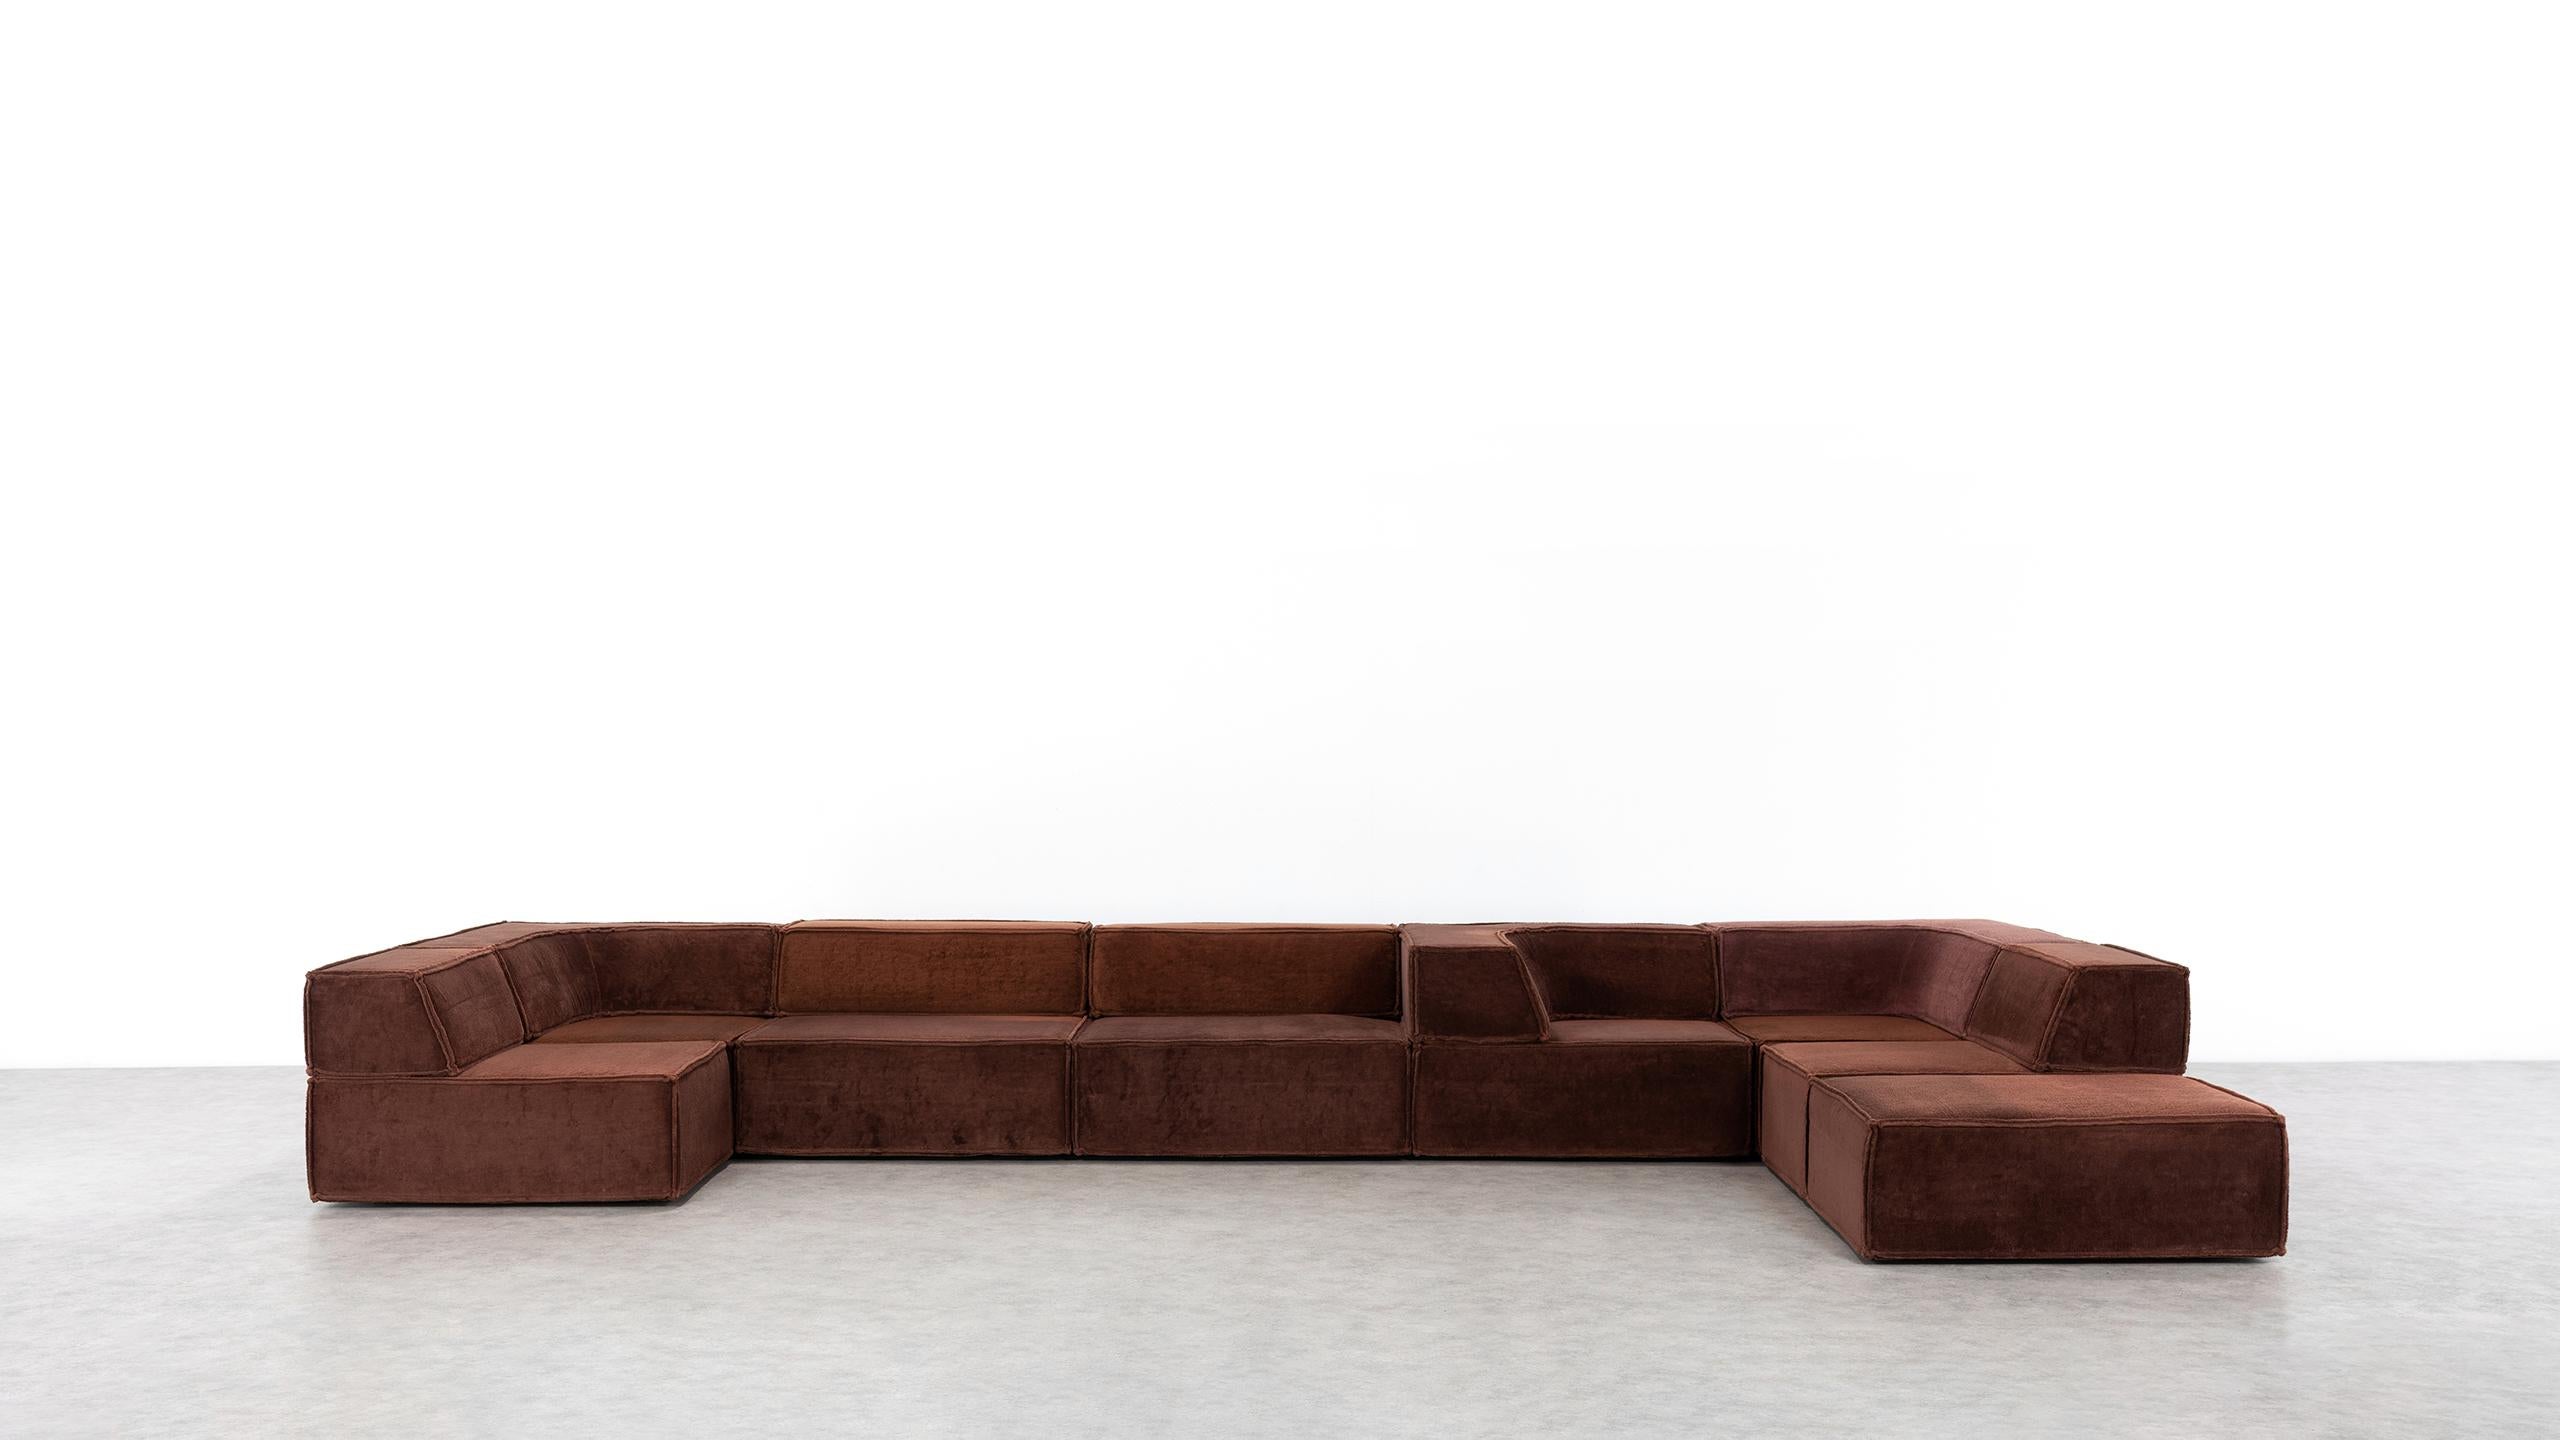 COR trio modular sofa, Giant Landscape in chocolate brown, 1972 by Team Form Ag.

The modular sofa system, which was created in 1972 by Team Form AG in Switzerland for COR, blends seamlessly into any environment. Taking the backrest away it can